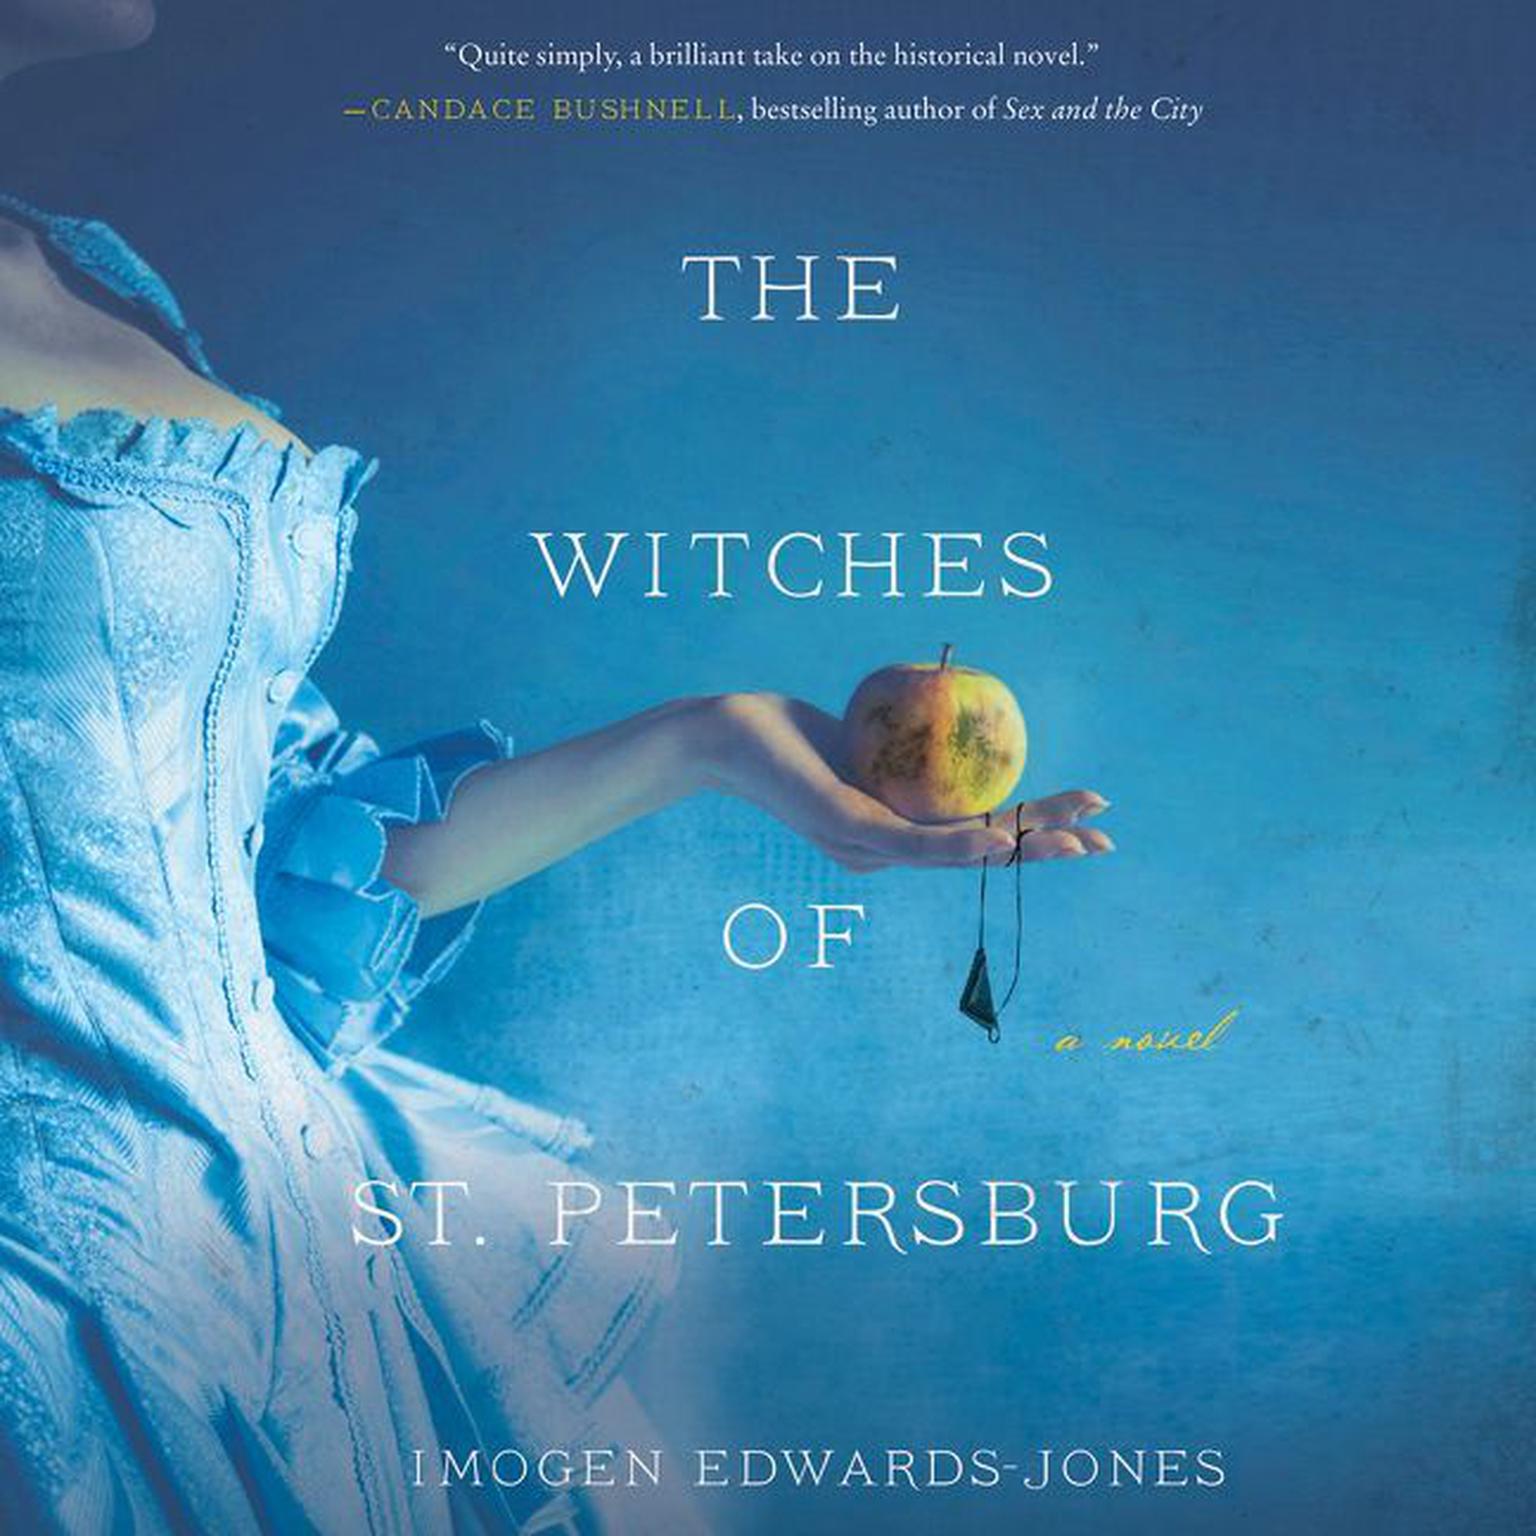 The Witches of St. Petersburg: A Novel Audiobook, by Imogen Edwards-Jones